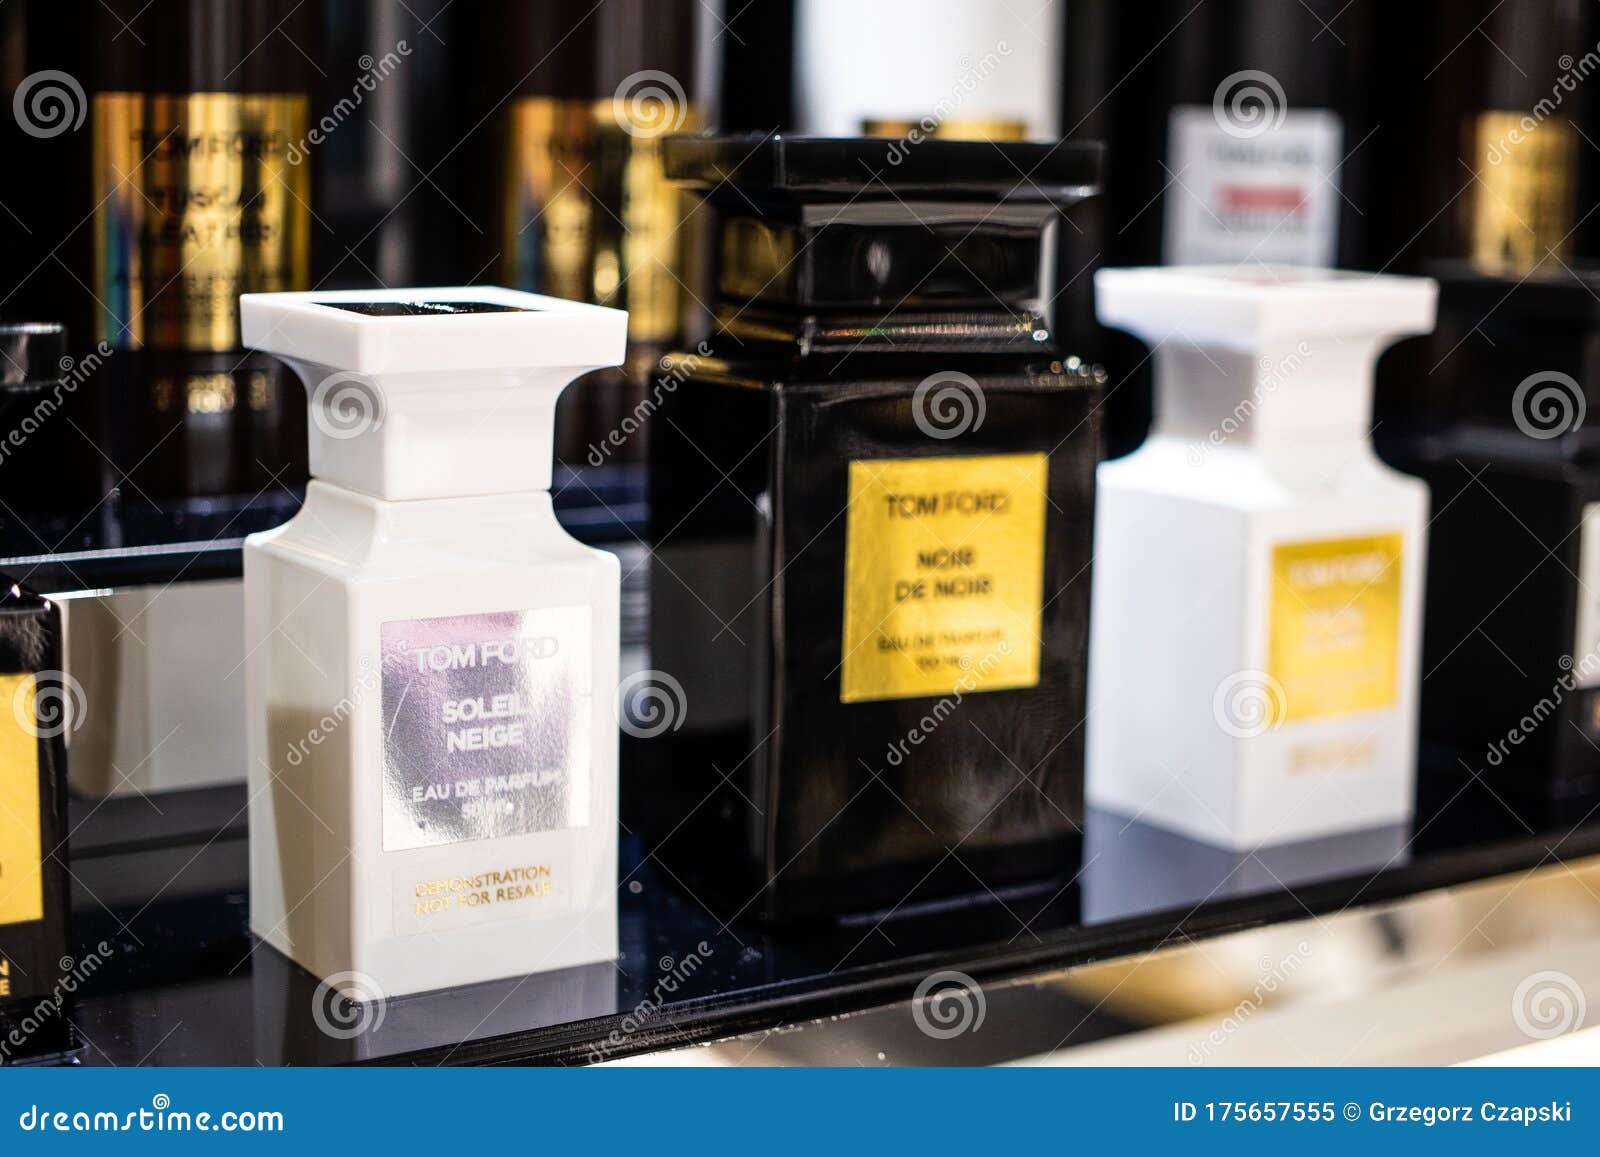 Tom Ford Fragrance, Perfume on the Shop Display for Sale, Thomas Carlyle  Ford is American Fashion Designer Editorial Image - Image of fashion,  container: 175657555